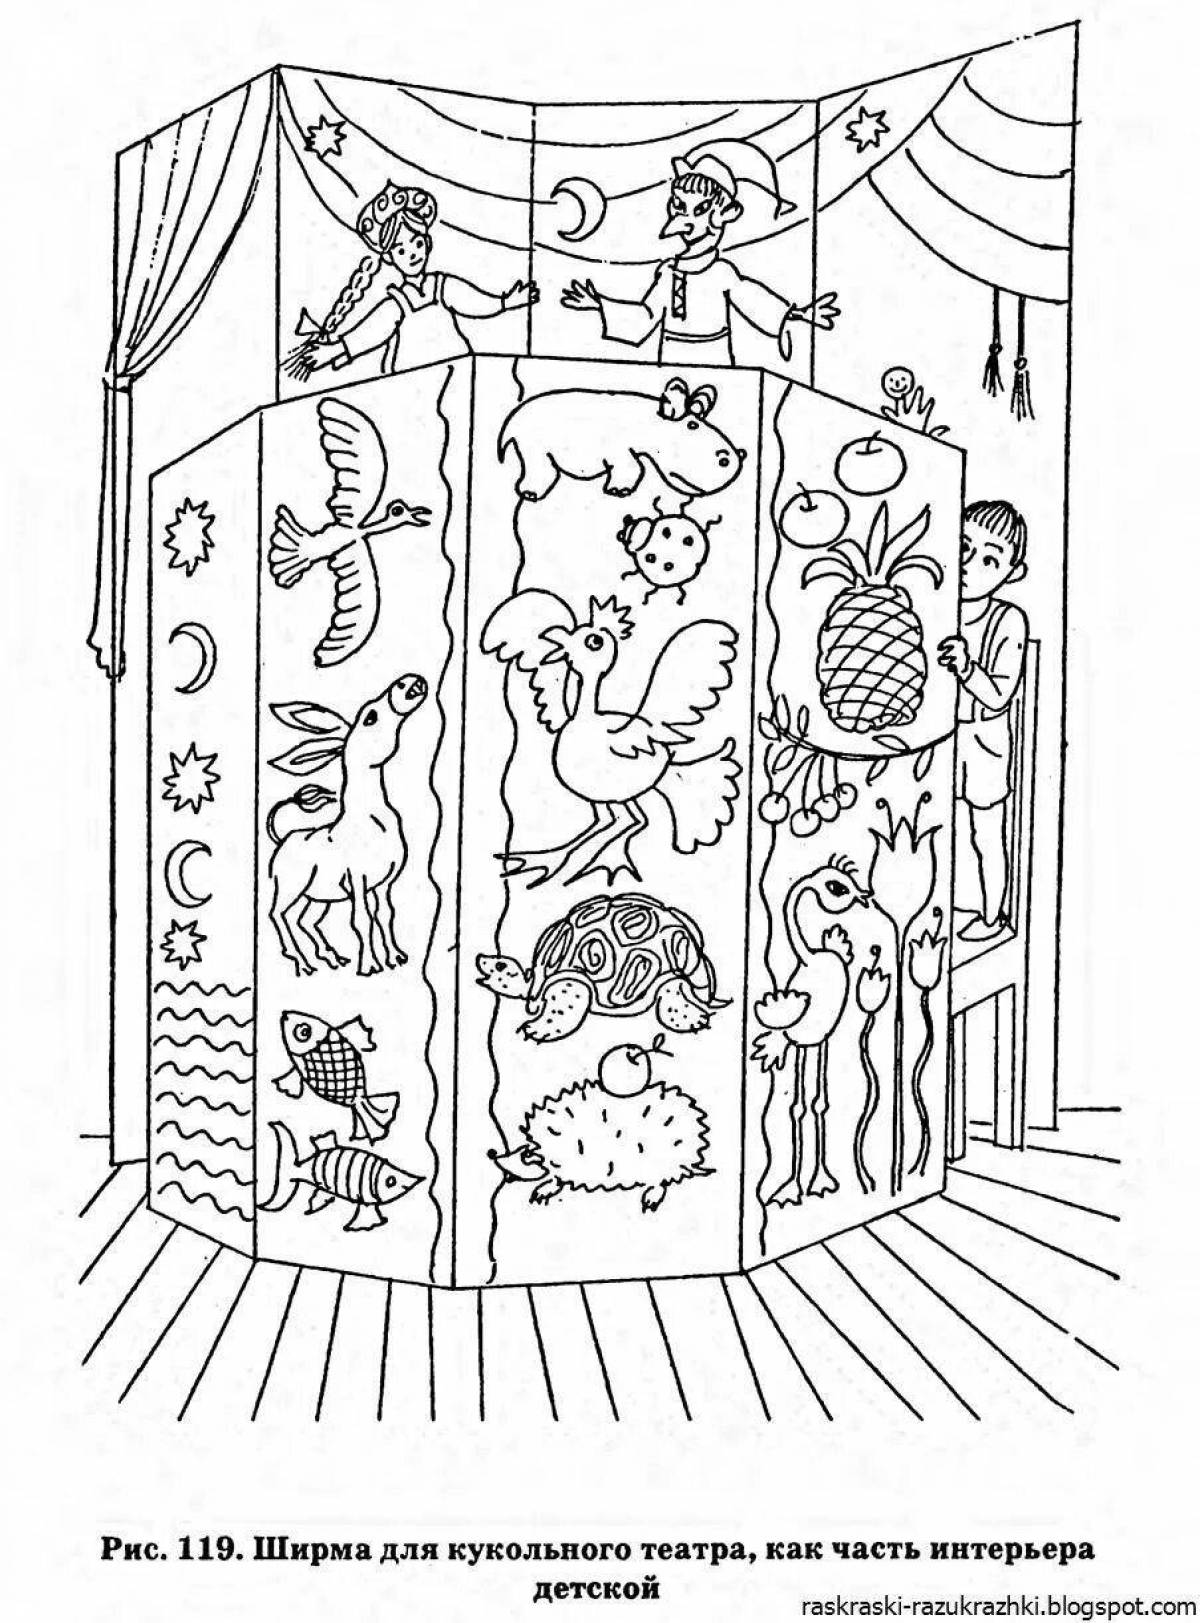 Rampant puppet theater coloring page